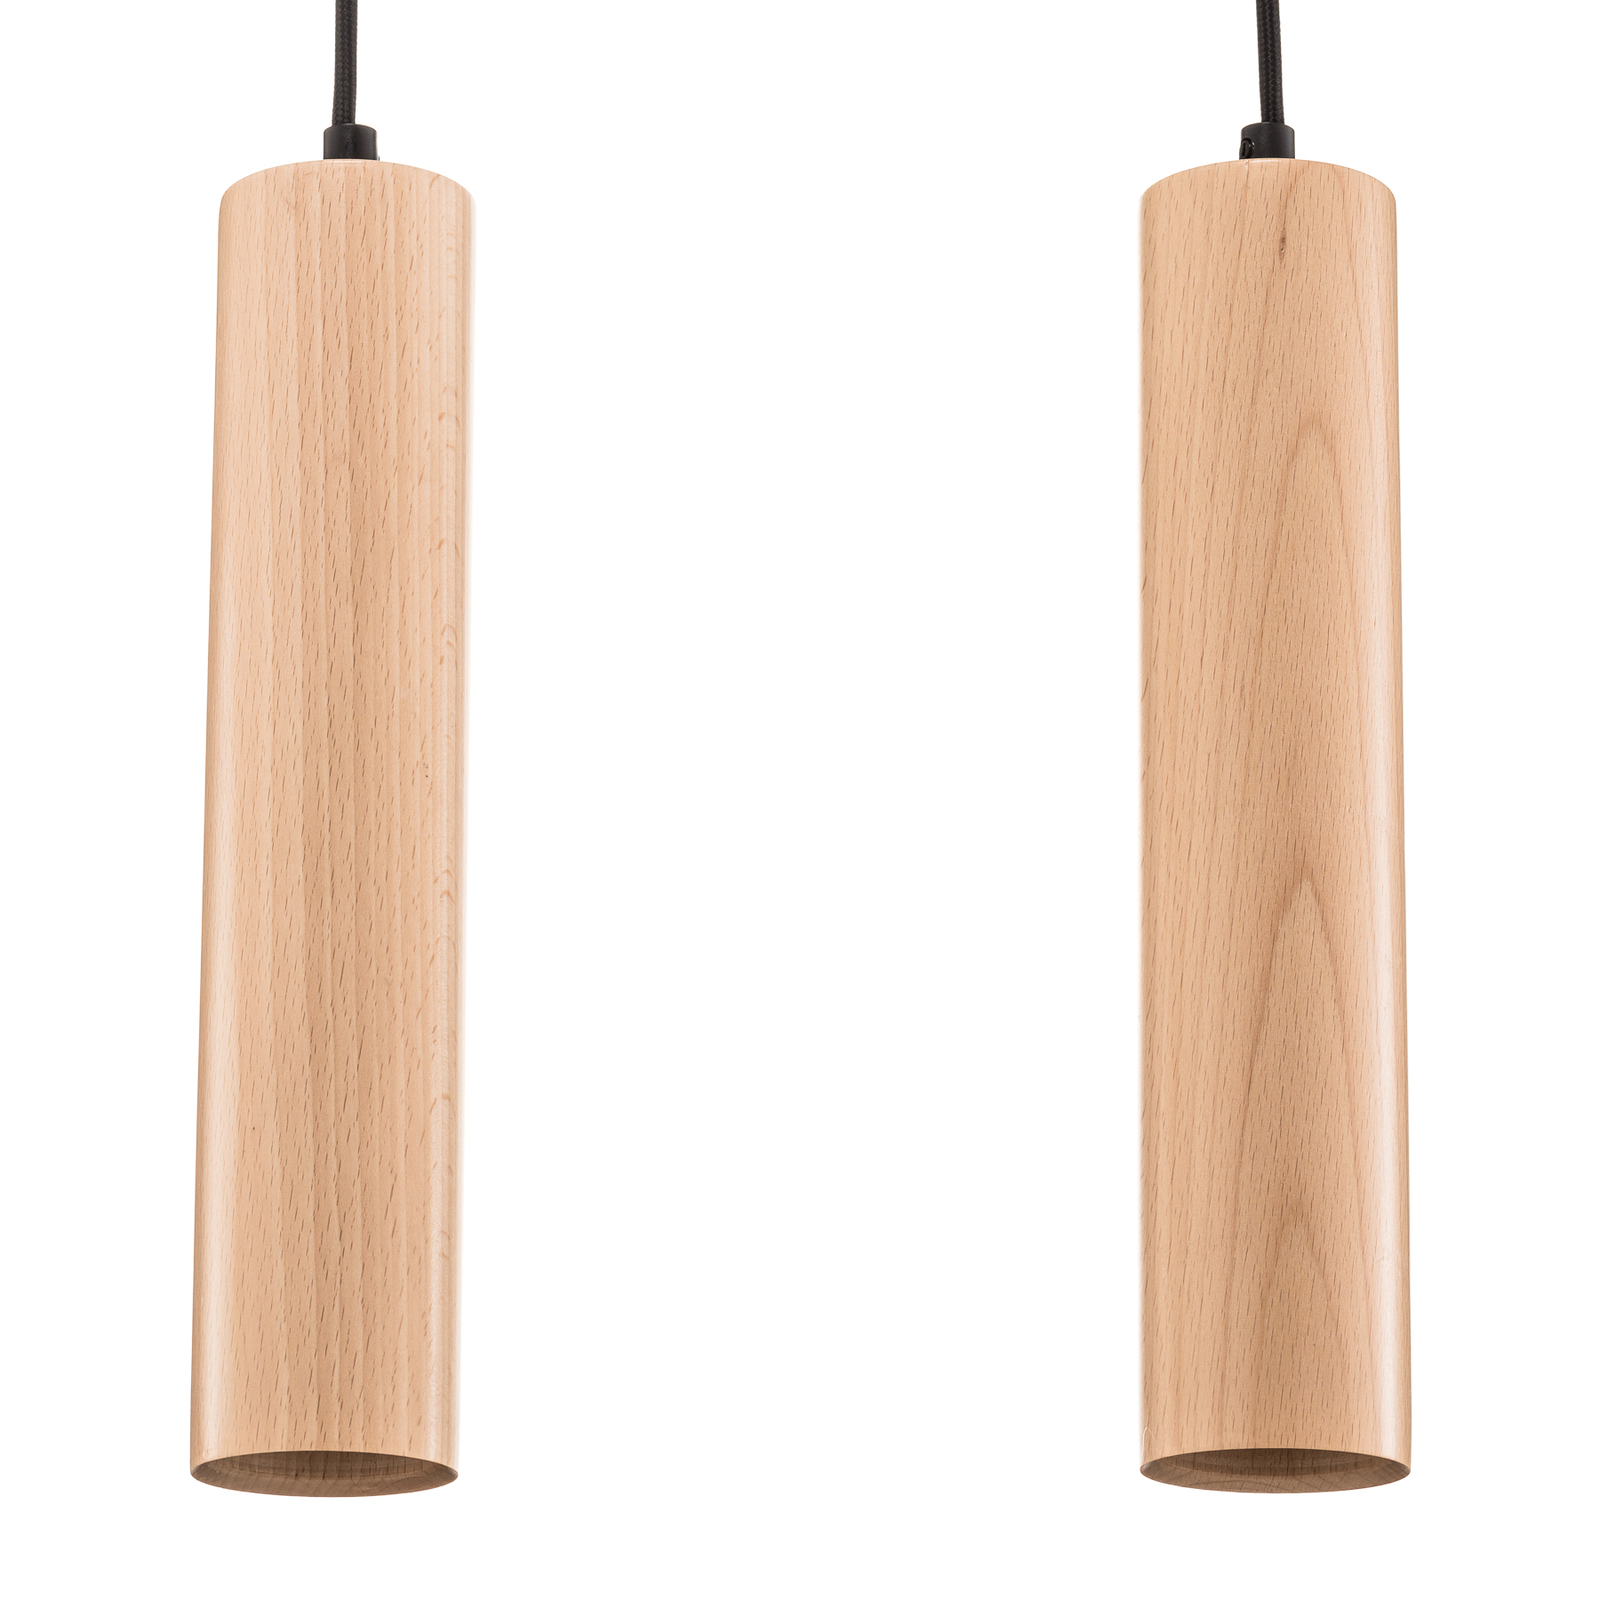 Tube hanging light made of wood, two-bulb